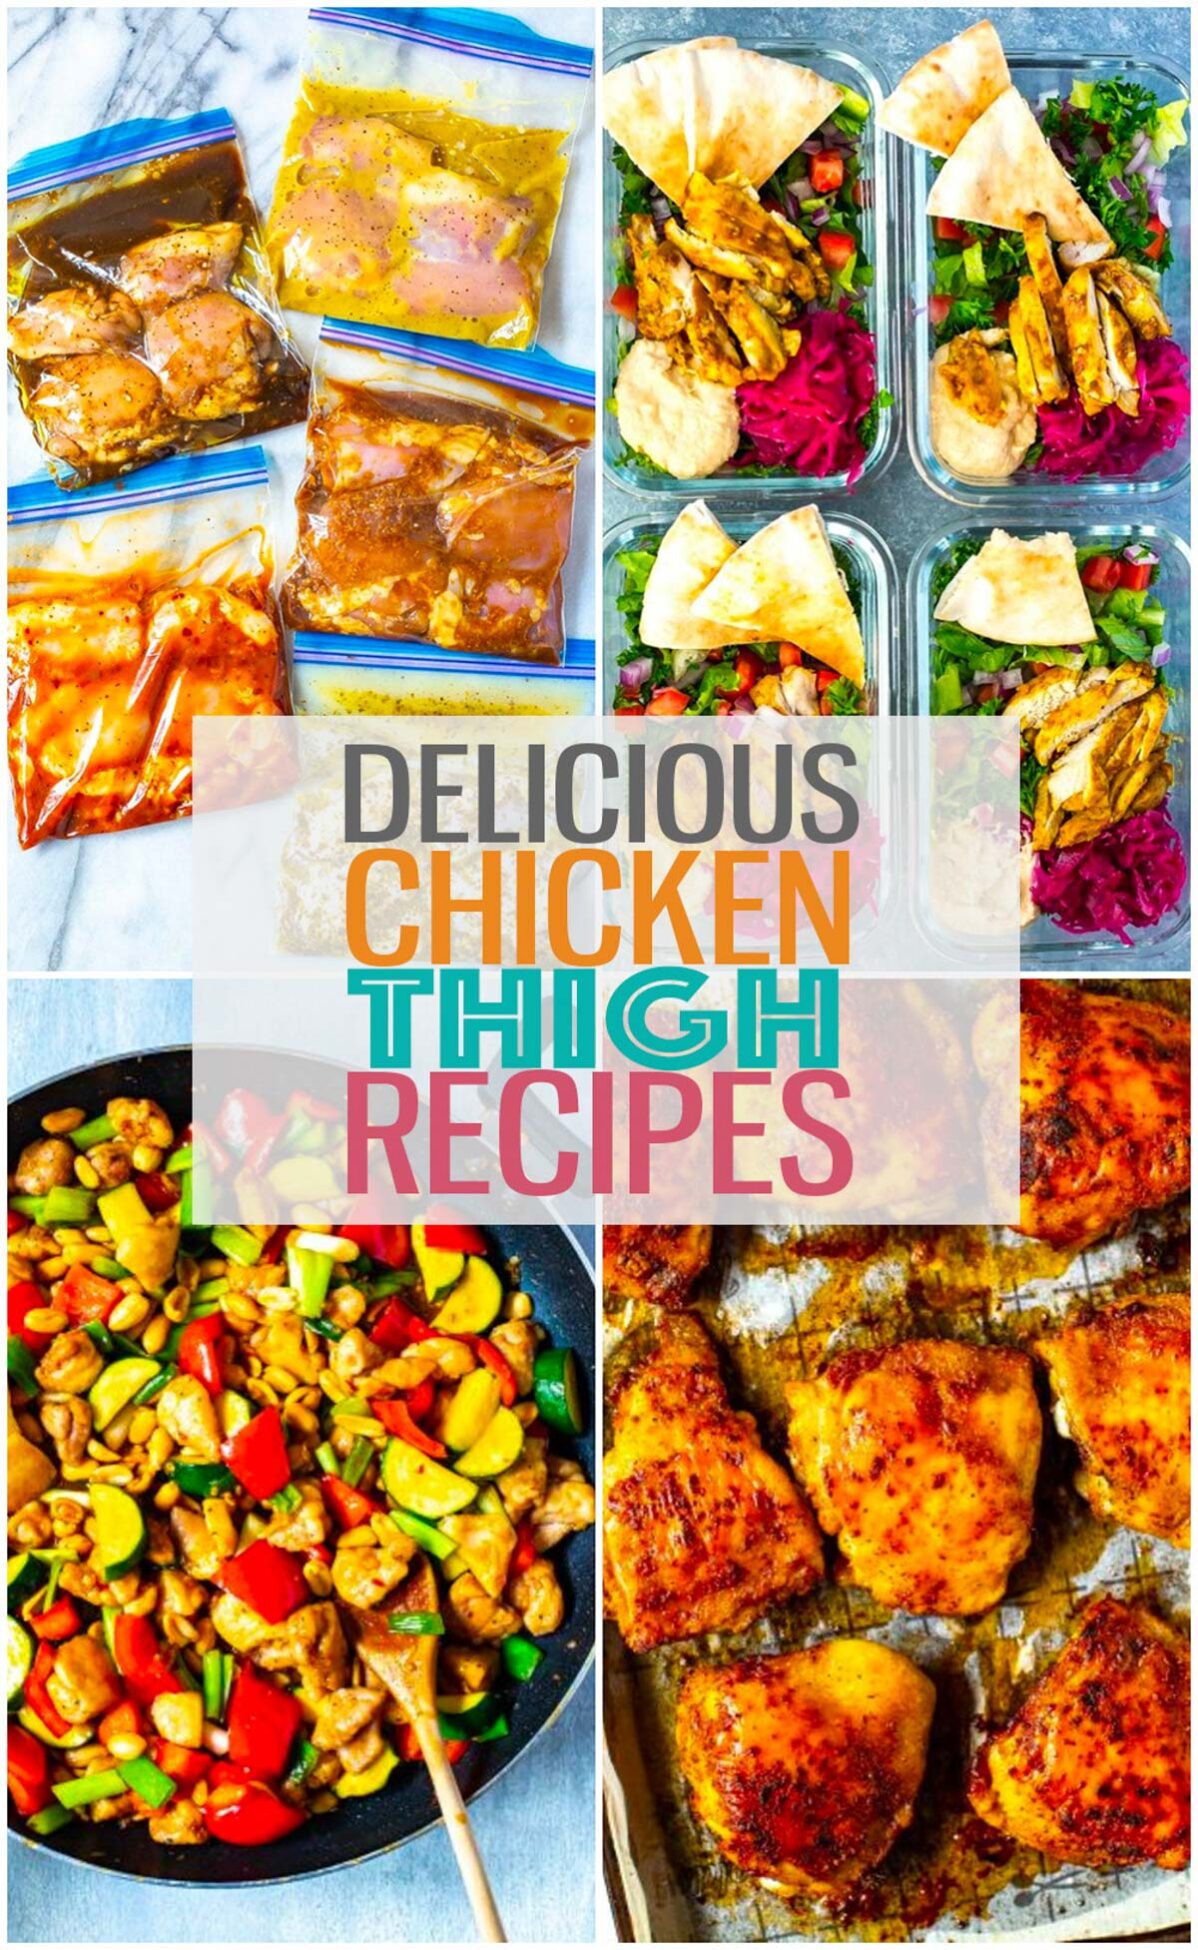 A collage of four different chicken thigh recipes with the text "Delicious Chicken Thigh Recipes" layered over top.